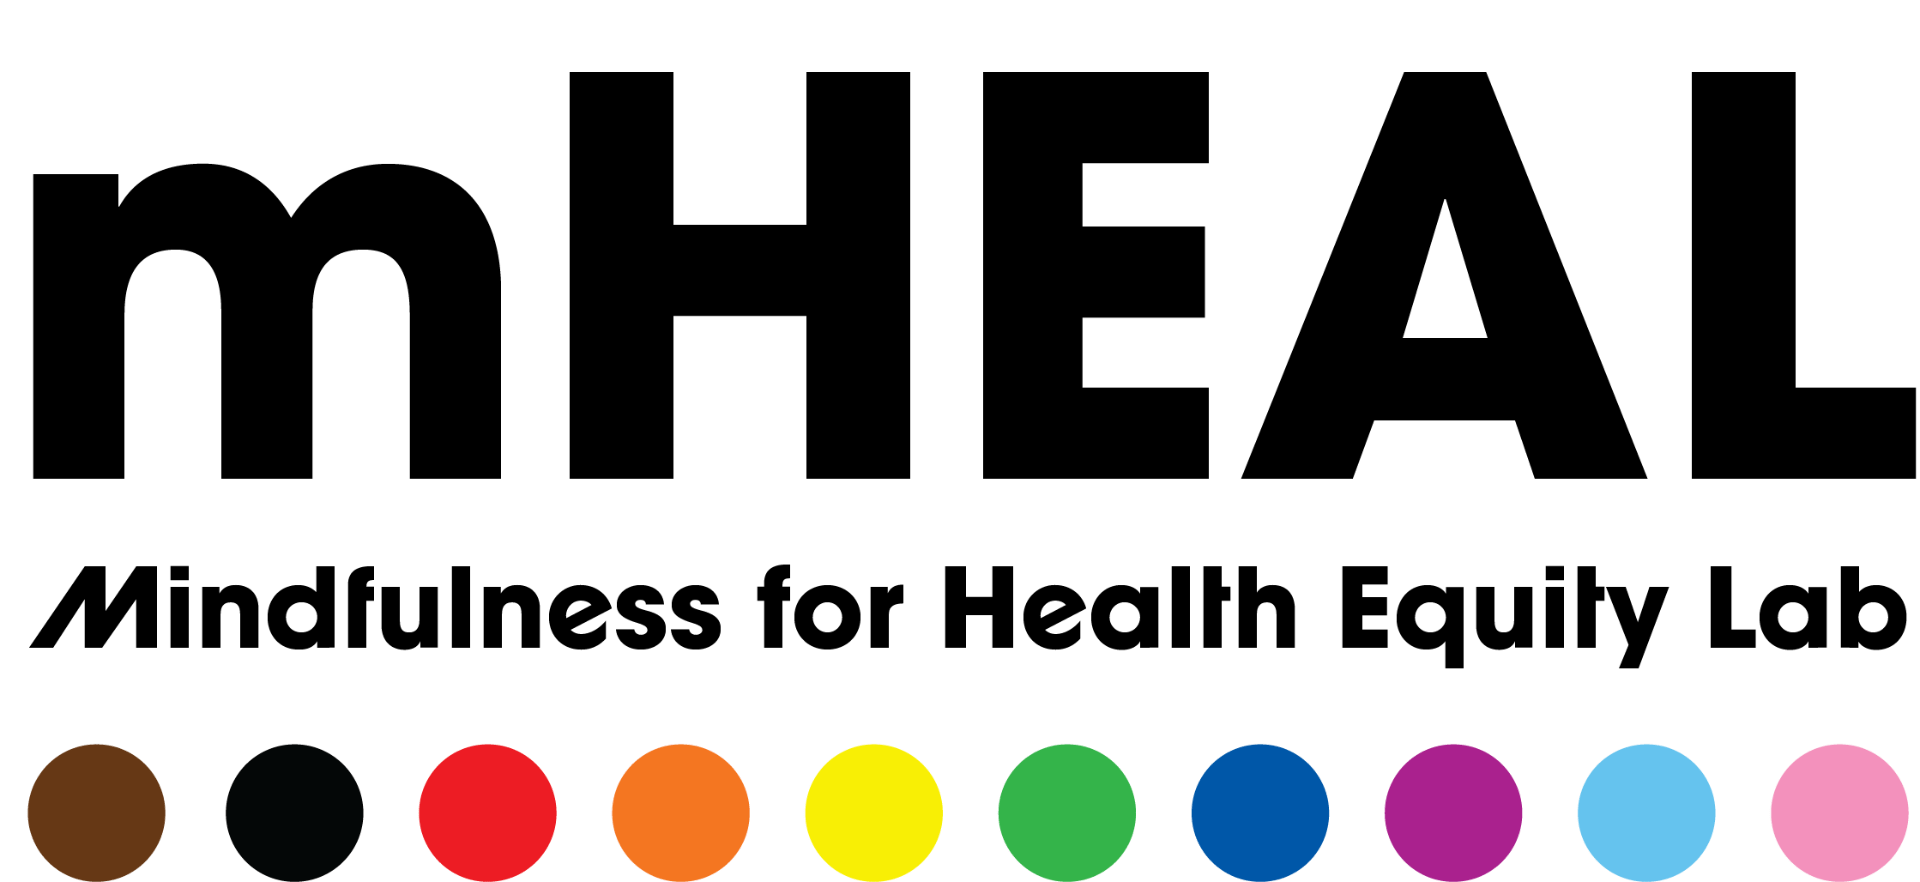 Mindfulness for Health Equity Lab (mHEAL) at Brown University School of Public Health